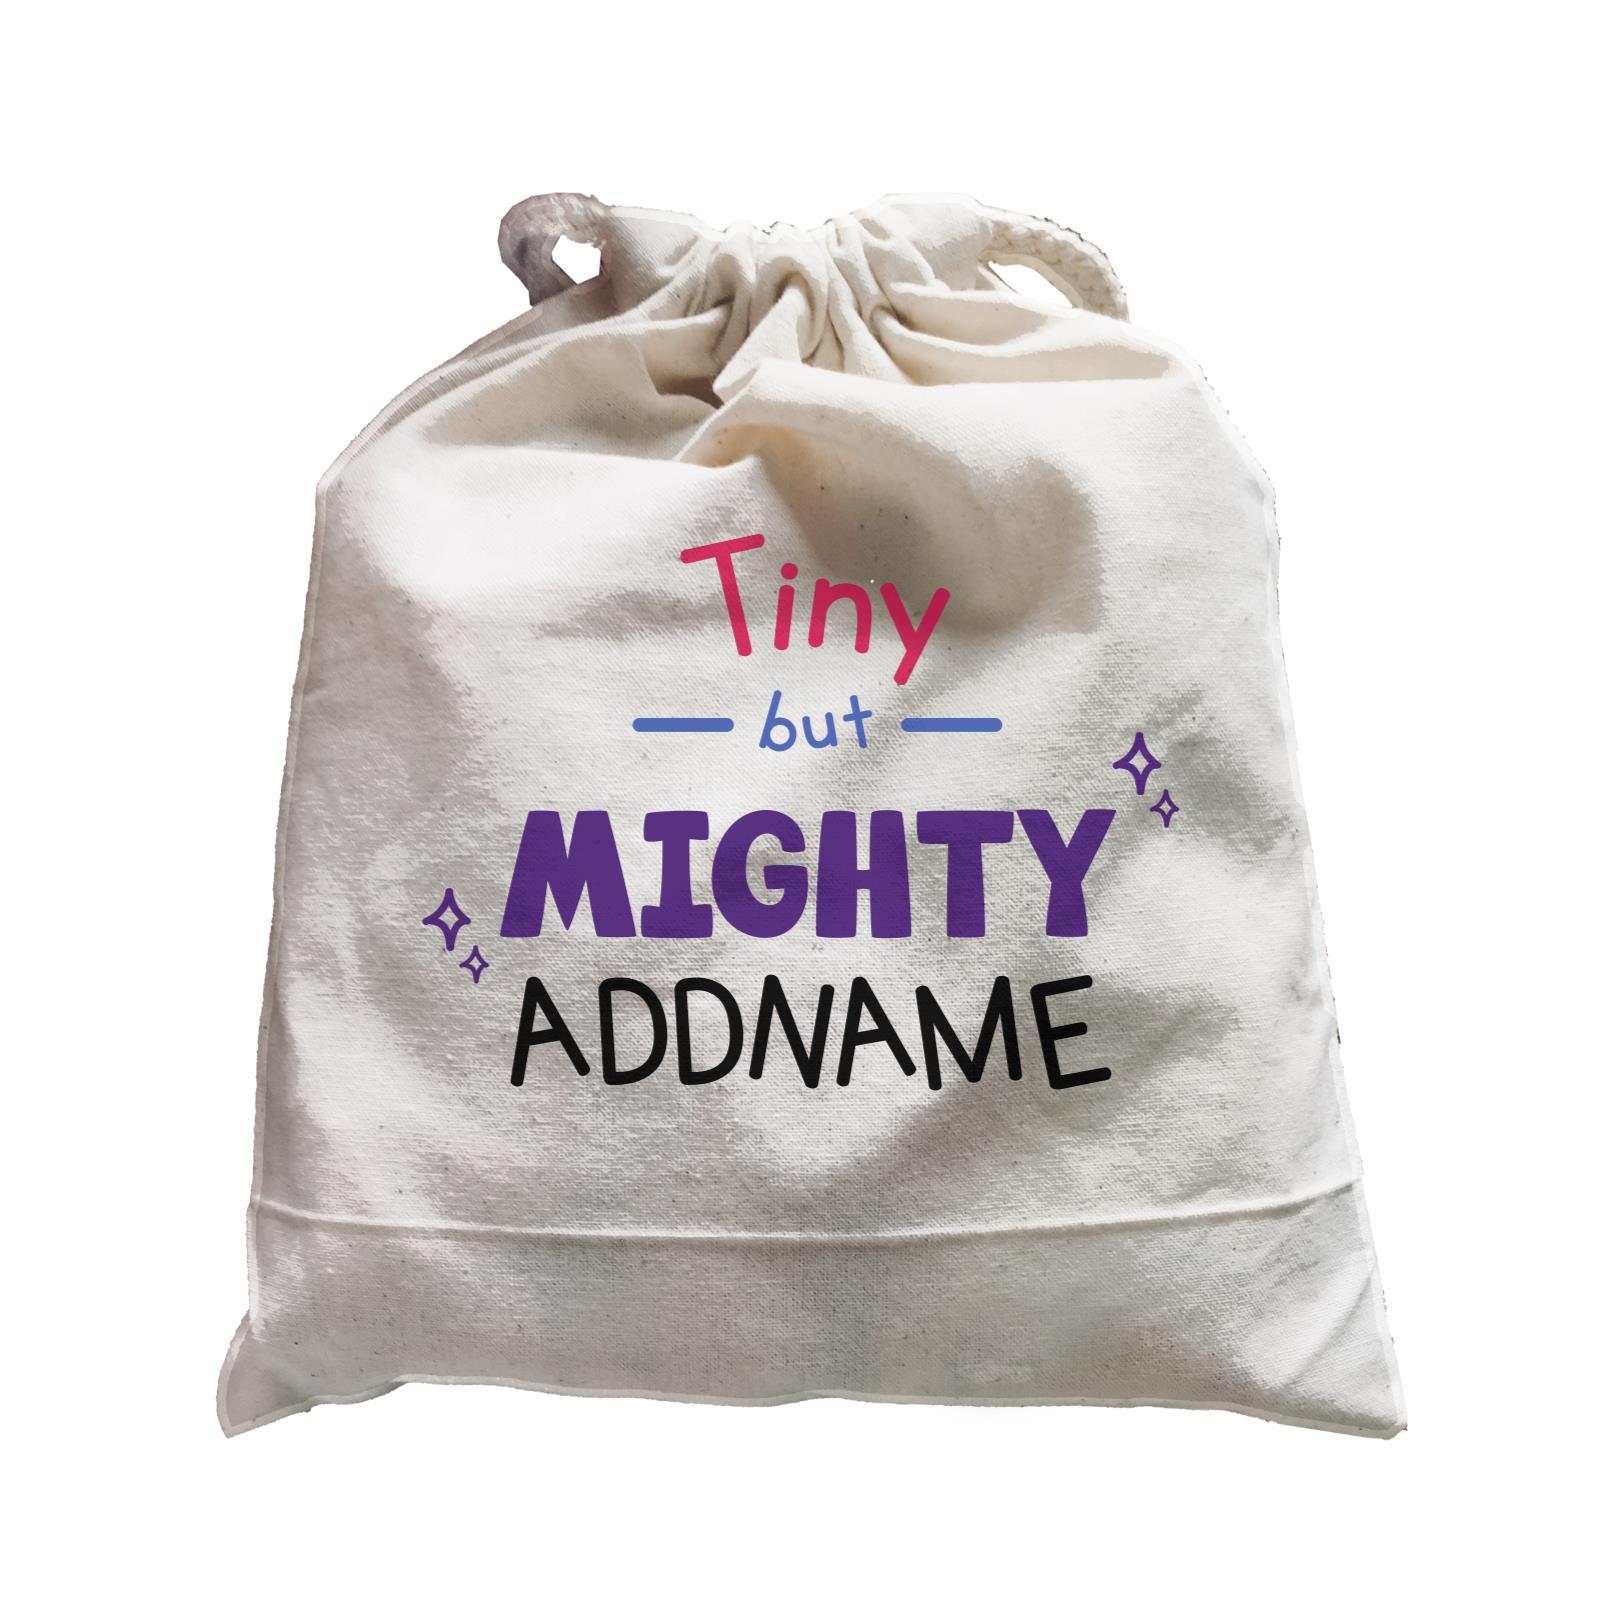 Children's Day Gift Series Tiny But Mighty Addname  Satchel